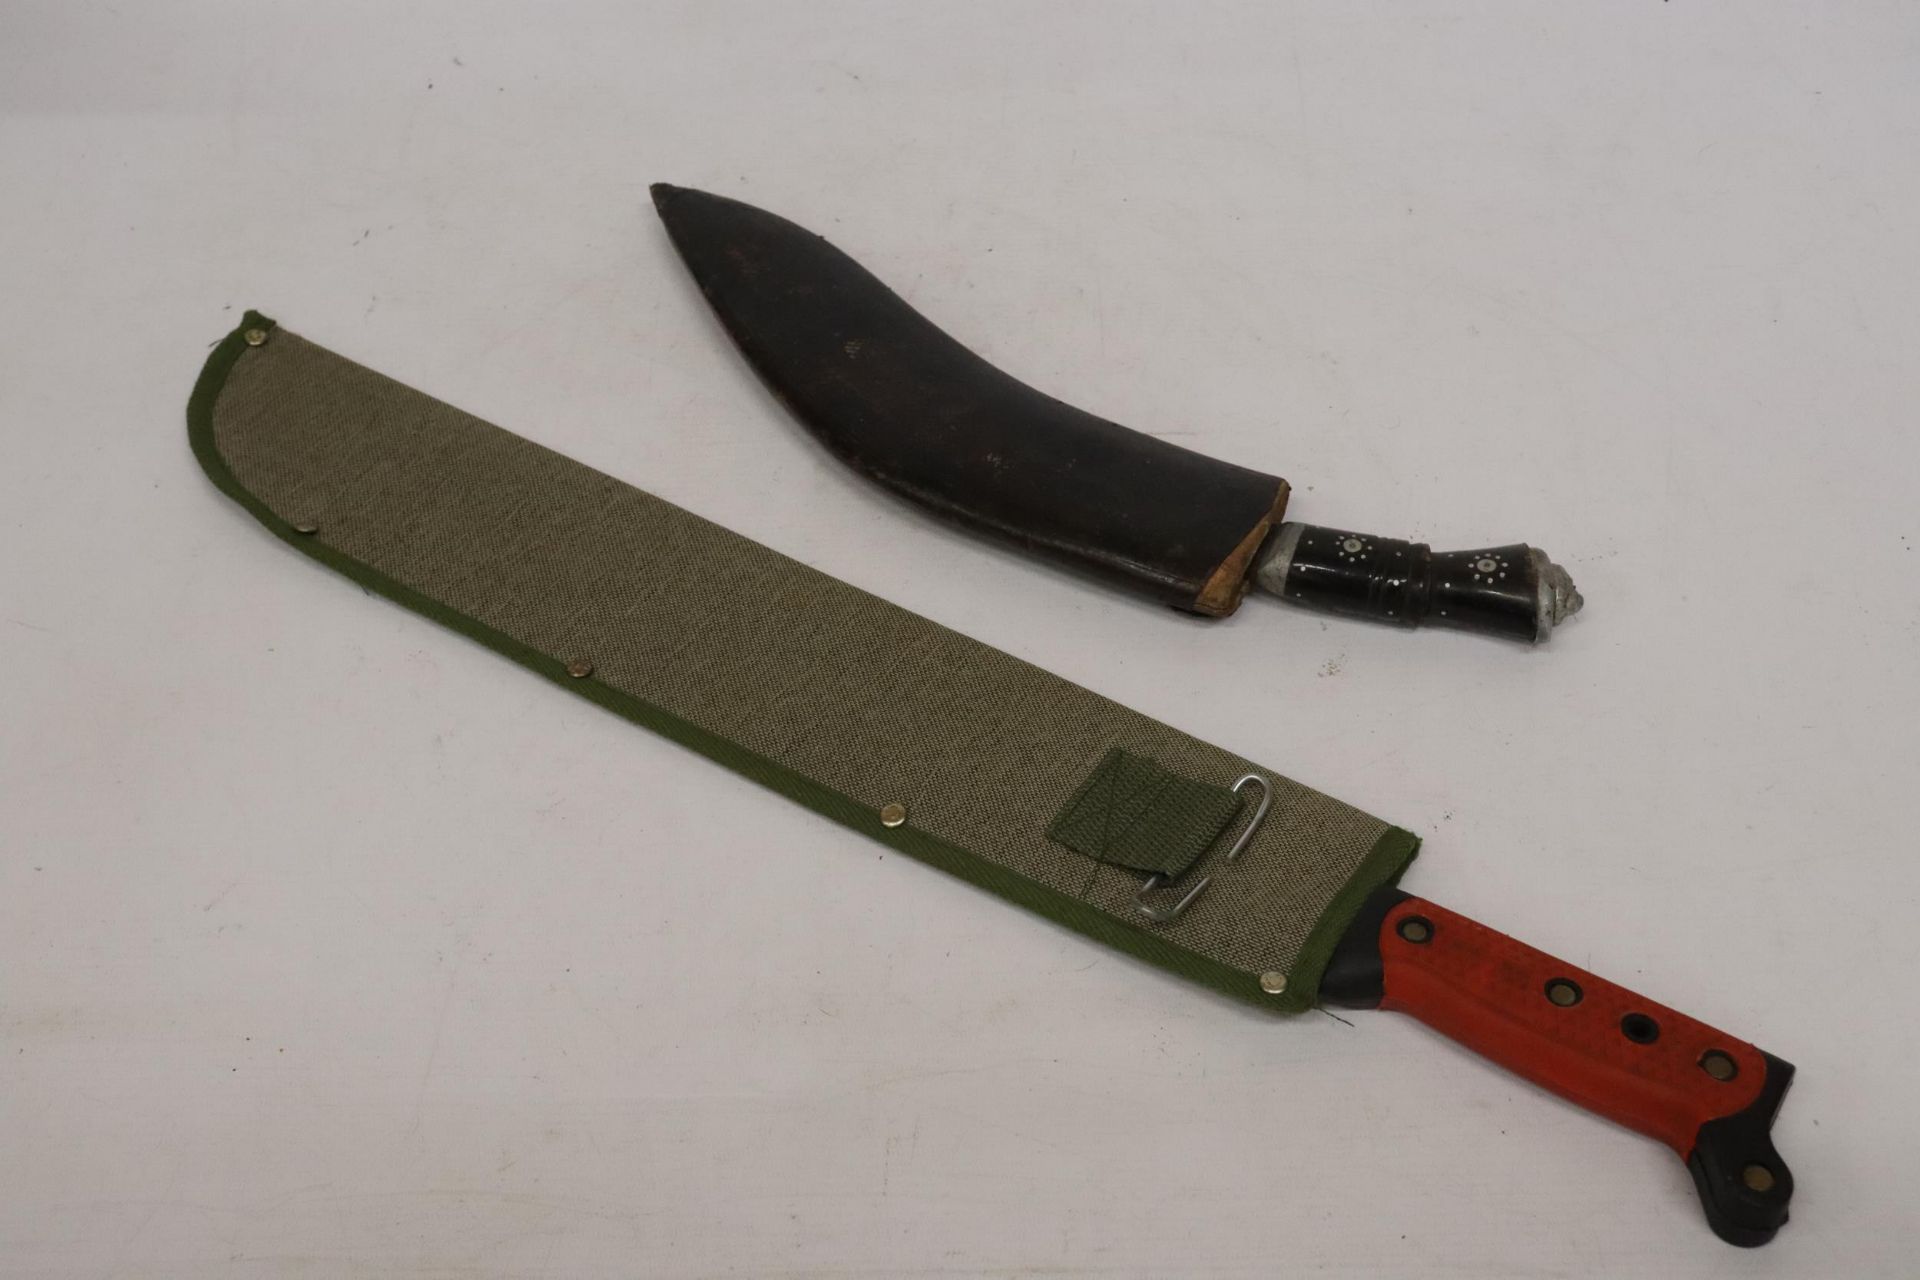 A VINTAGE GURKAH KUKRI KNIFE AND A MACHETE, BOTH IN SHEATHS - Image 6 of 6